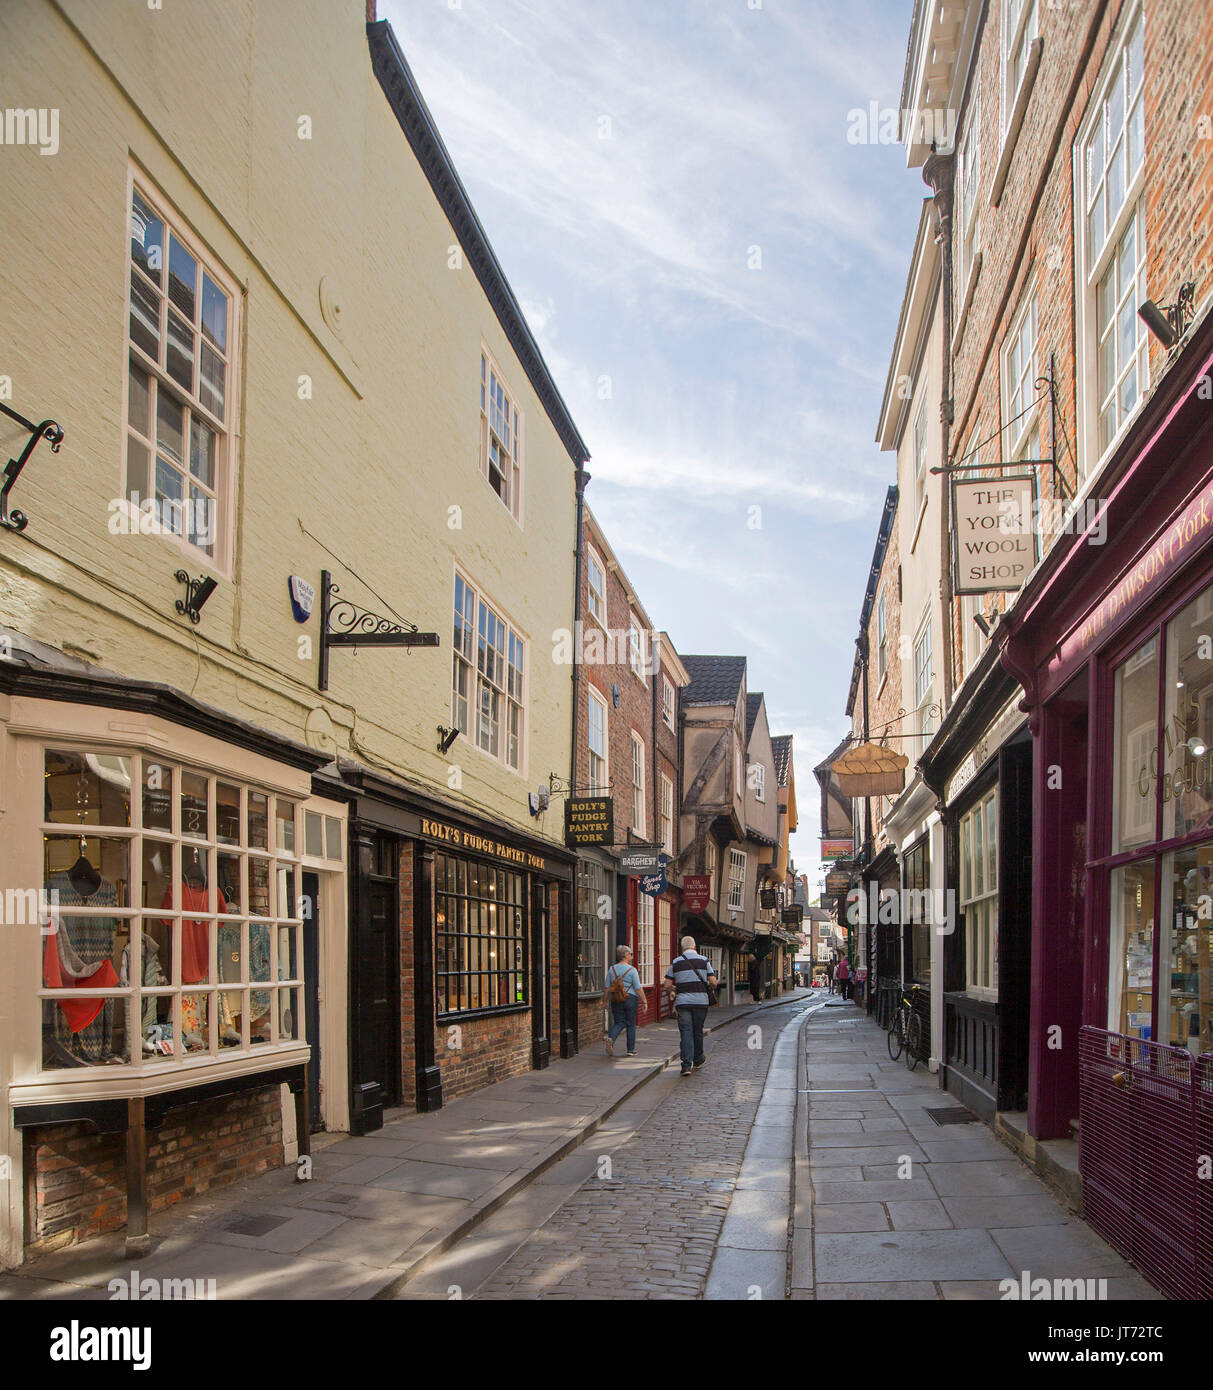 Historic shops lining ancient narrow cobbled street in The Shambles in city of York, England with pedestrians wandering along Stock Photo